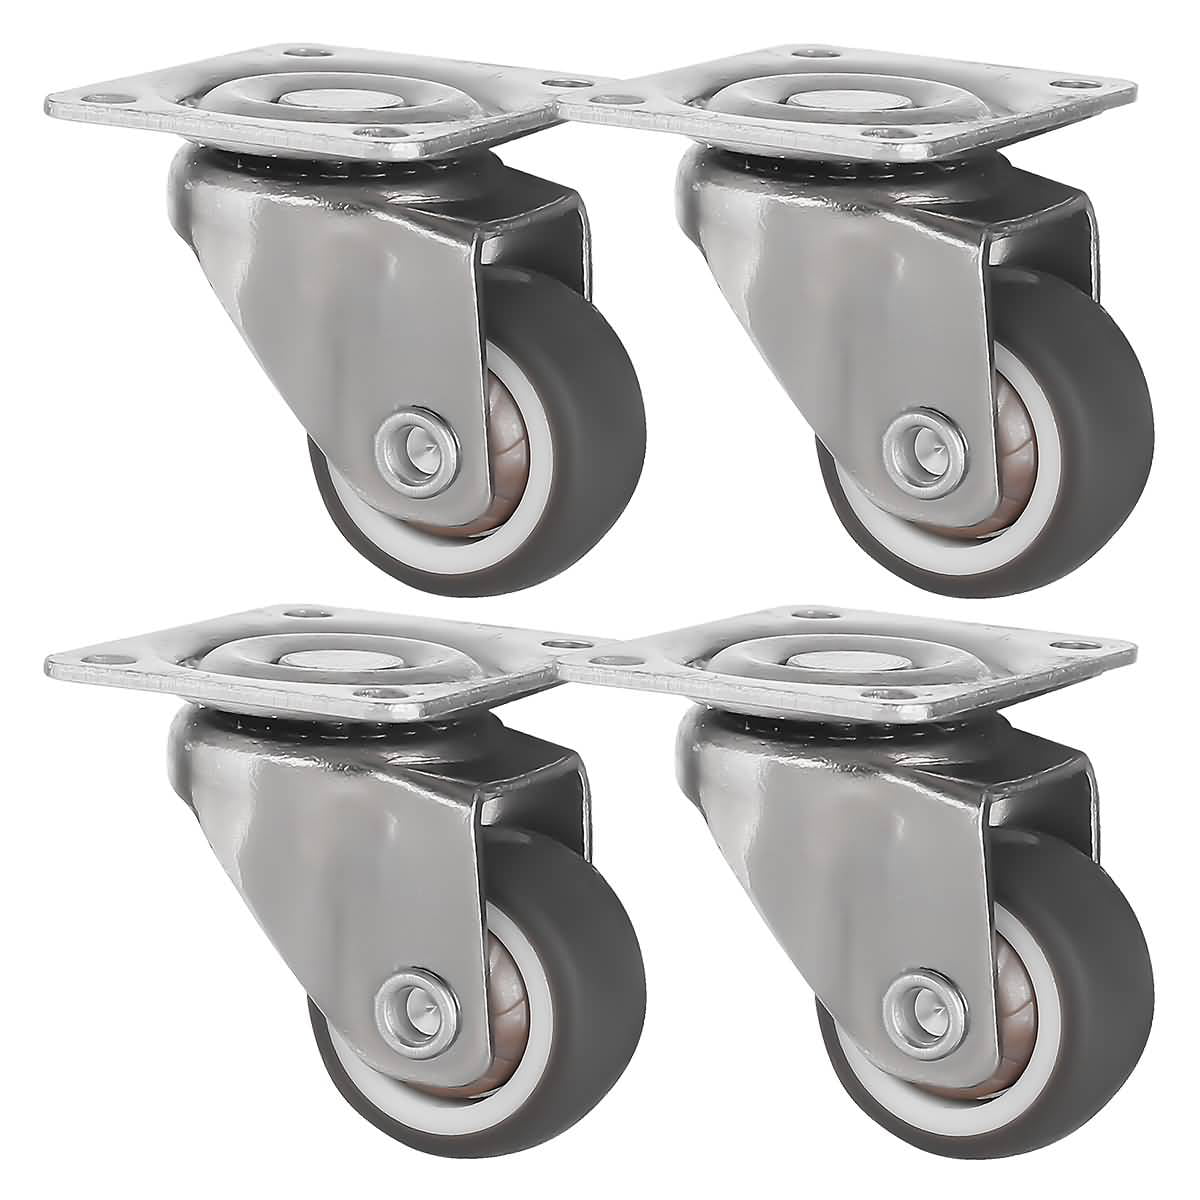 Pack of 20 25 mm Small Wheel Castors Rubber Casters Castors for Furniture Small